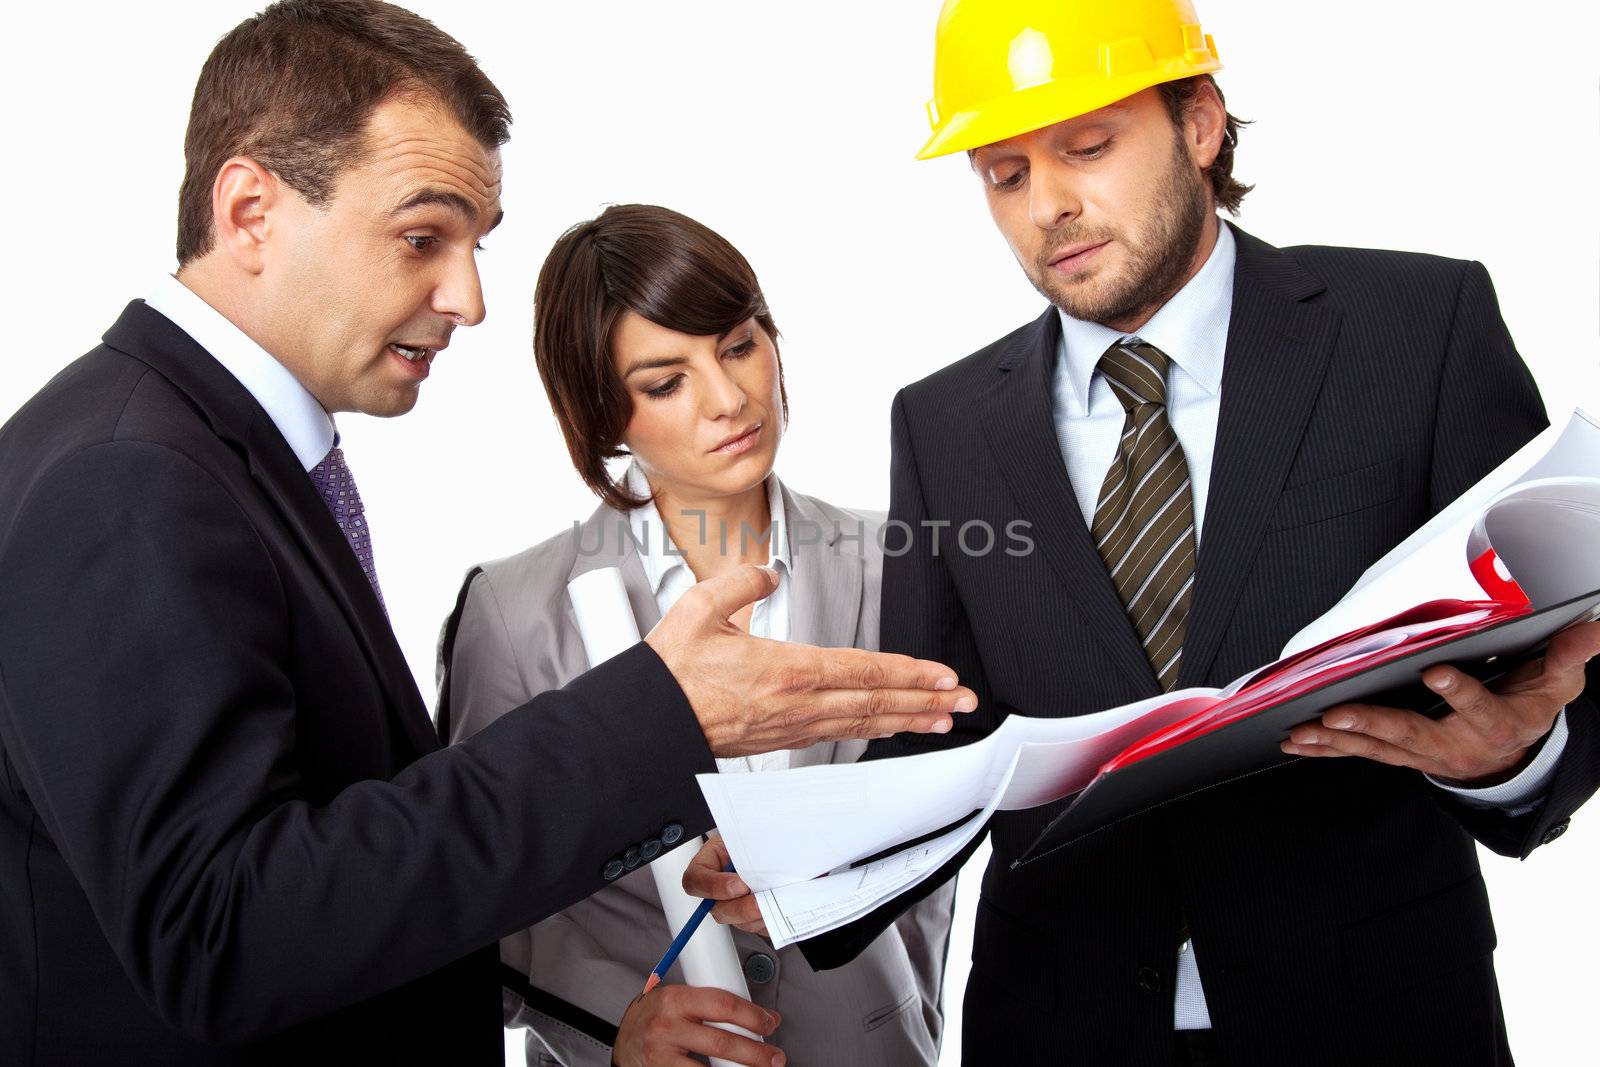 three people are arguing over a plan, one with a helmet